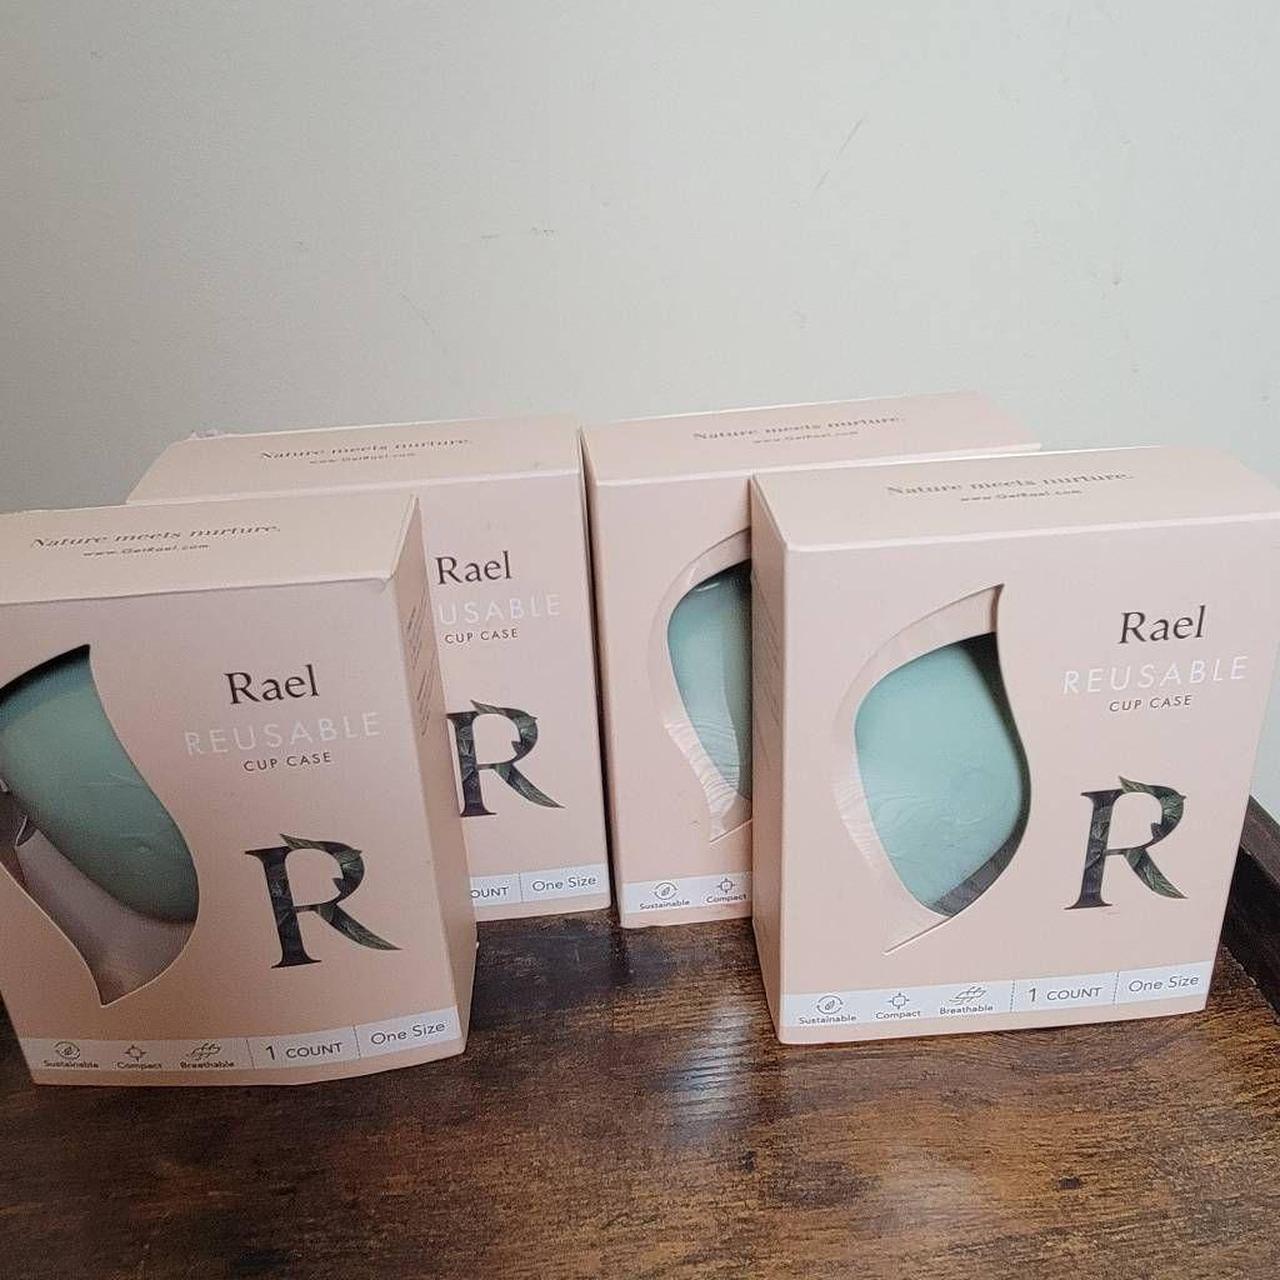 Rael Reusable Menstrual Cup - One Size